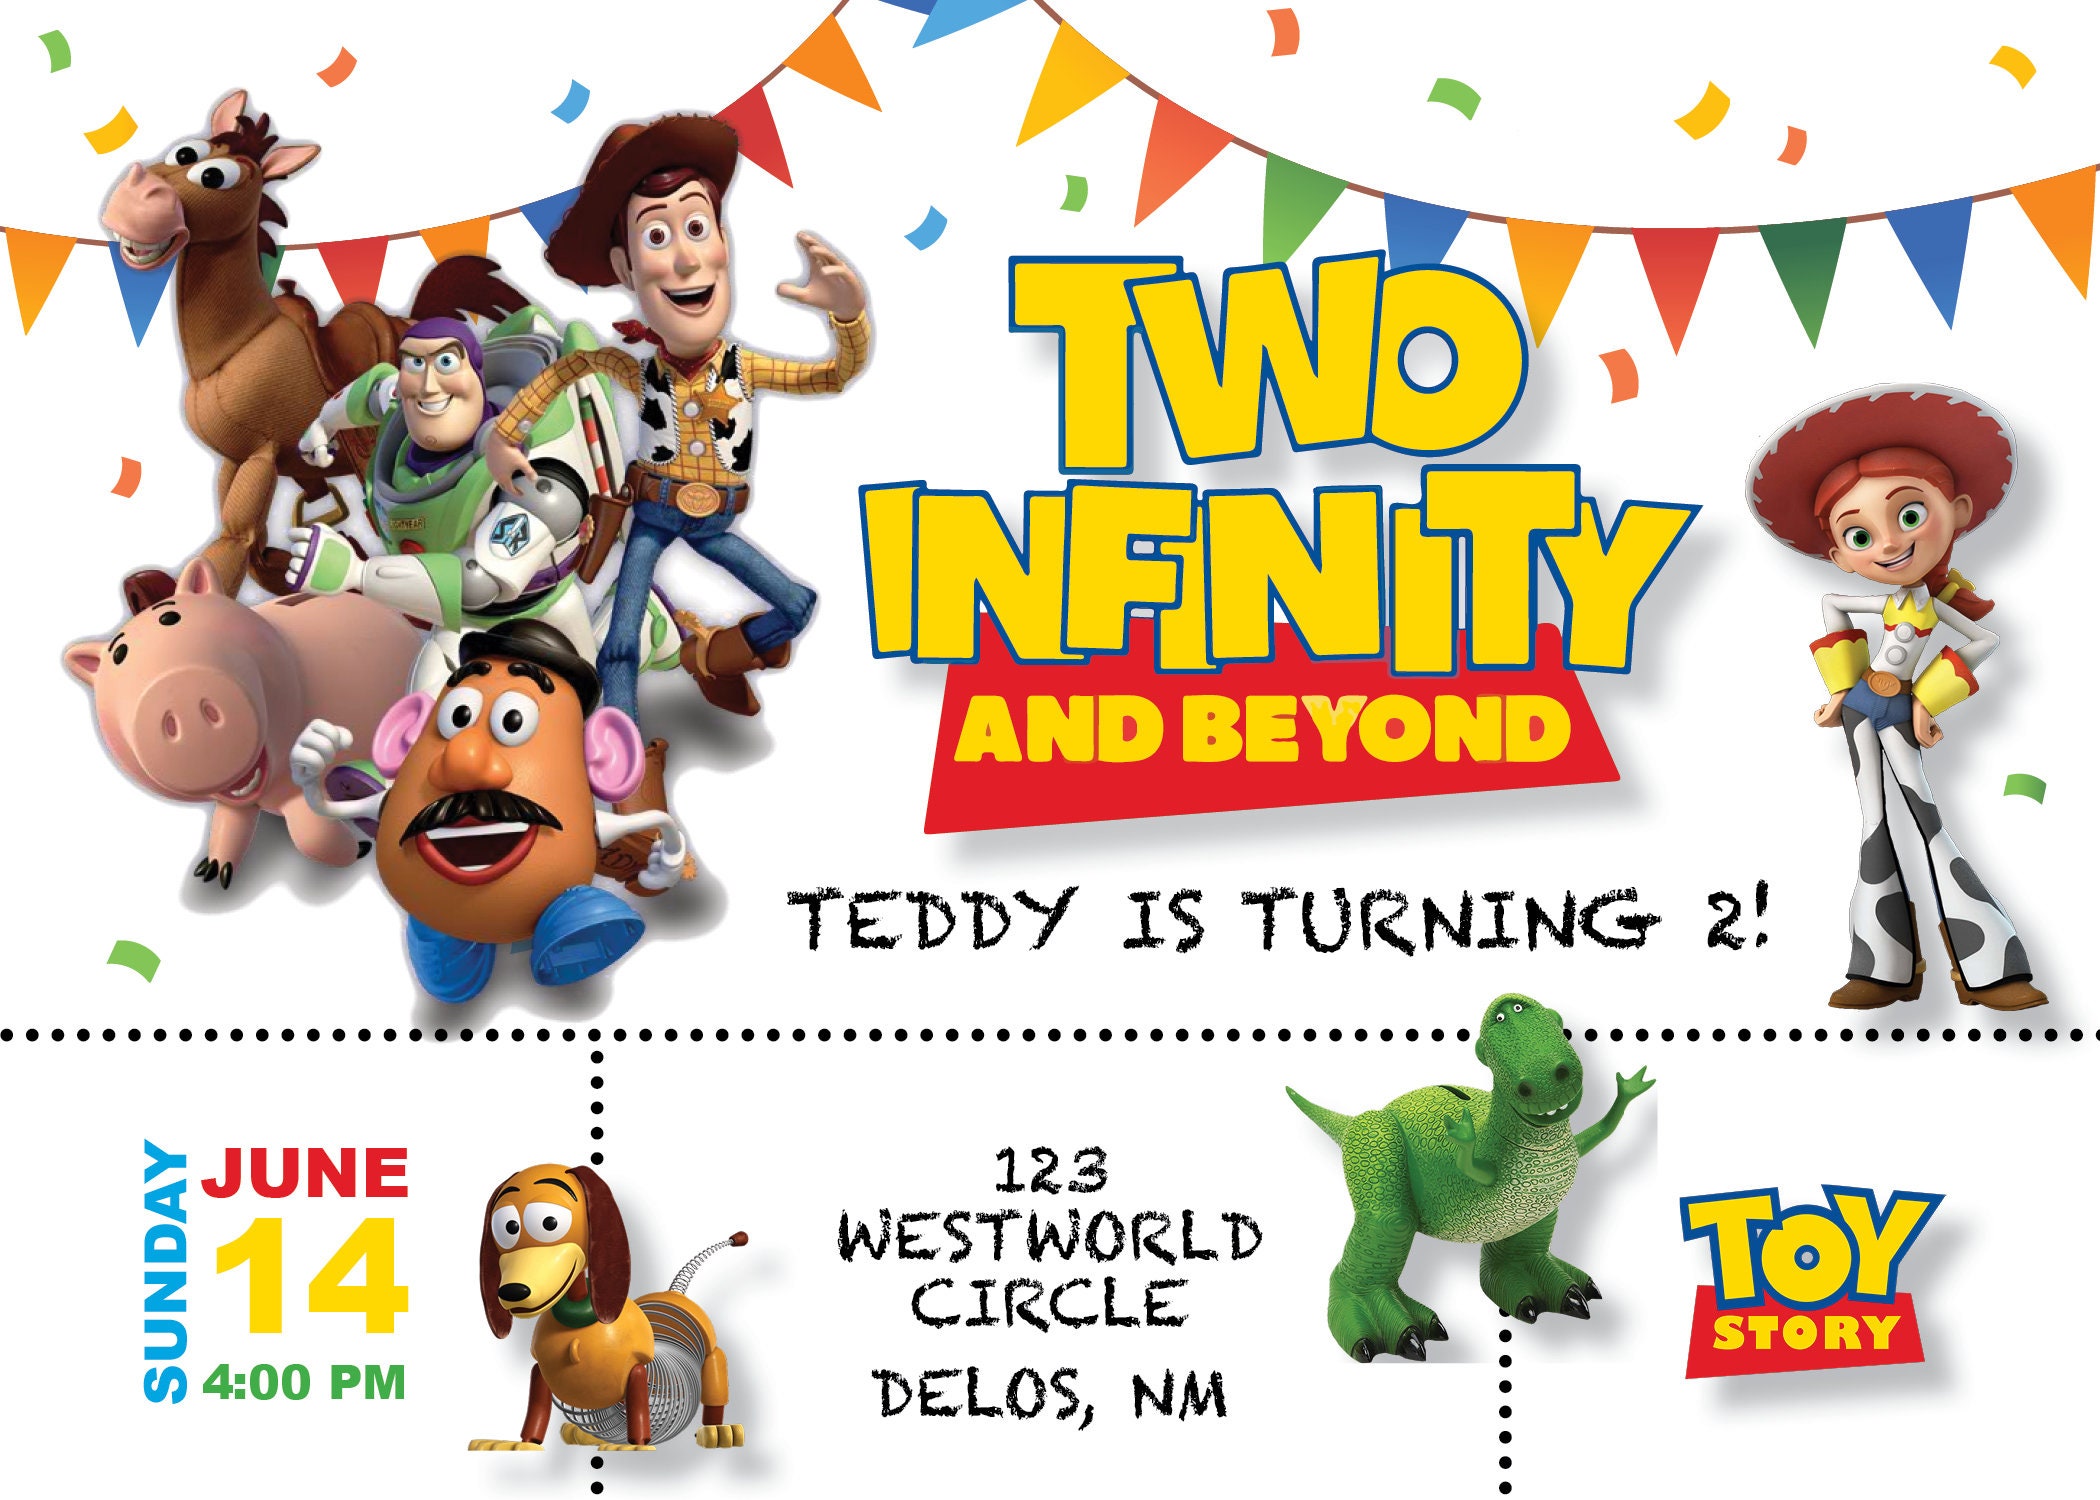 two-infinity-and-beyond-toy-story-2nd-birthday-party-invite-etsy